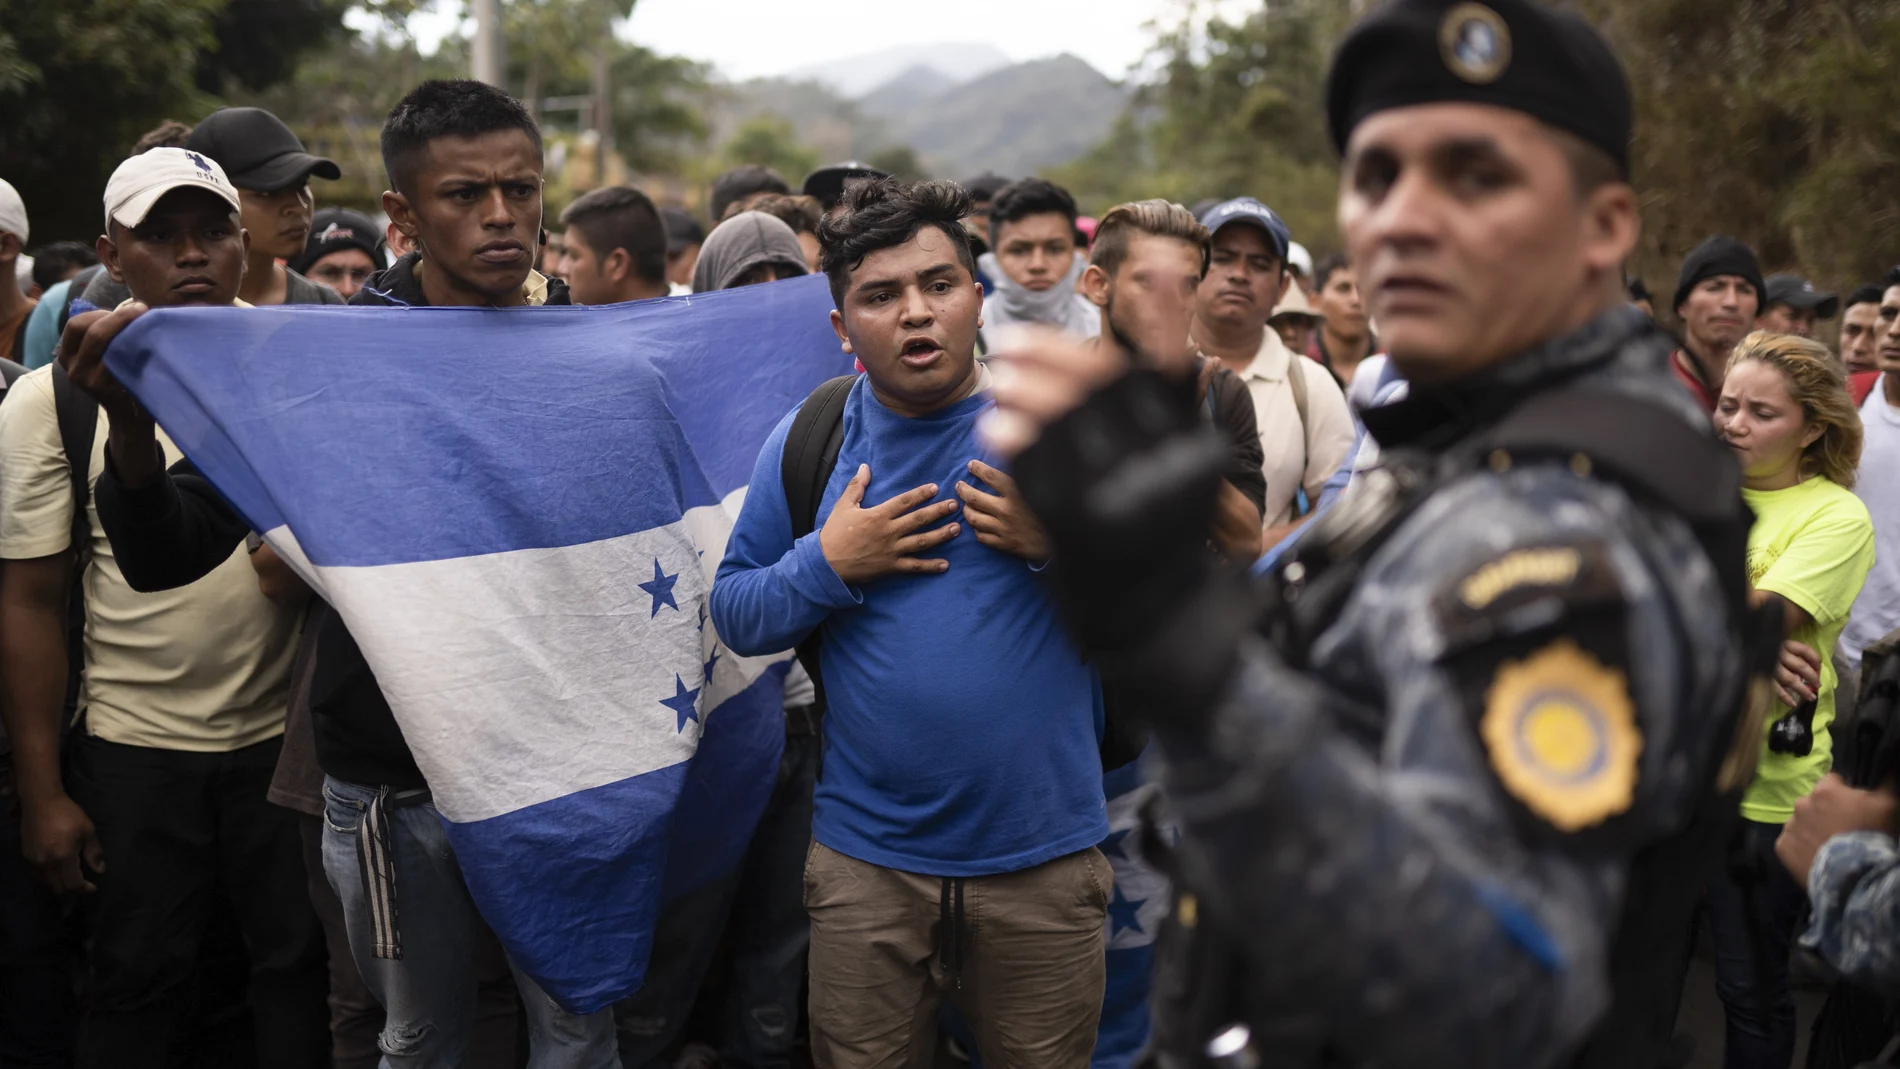 FILE - In this Jan. 16, 2020 file photo, Honduran migrants walking in a group stop before Guatemalan police near Agua Caliente, Guatemala, on the border with Honduras. In a report released Tuesday, Oct. 13, 2020, by the Democratic staff of a U.S. Senate committee says U.S. immigration agents assigned to Guatemala to advise local authorities violated terms of their funding by helping officials deport Hondurans traveling in a migrant caravan early this year. (AP Photo/Santiago Billy, File)